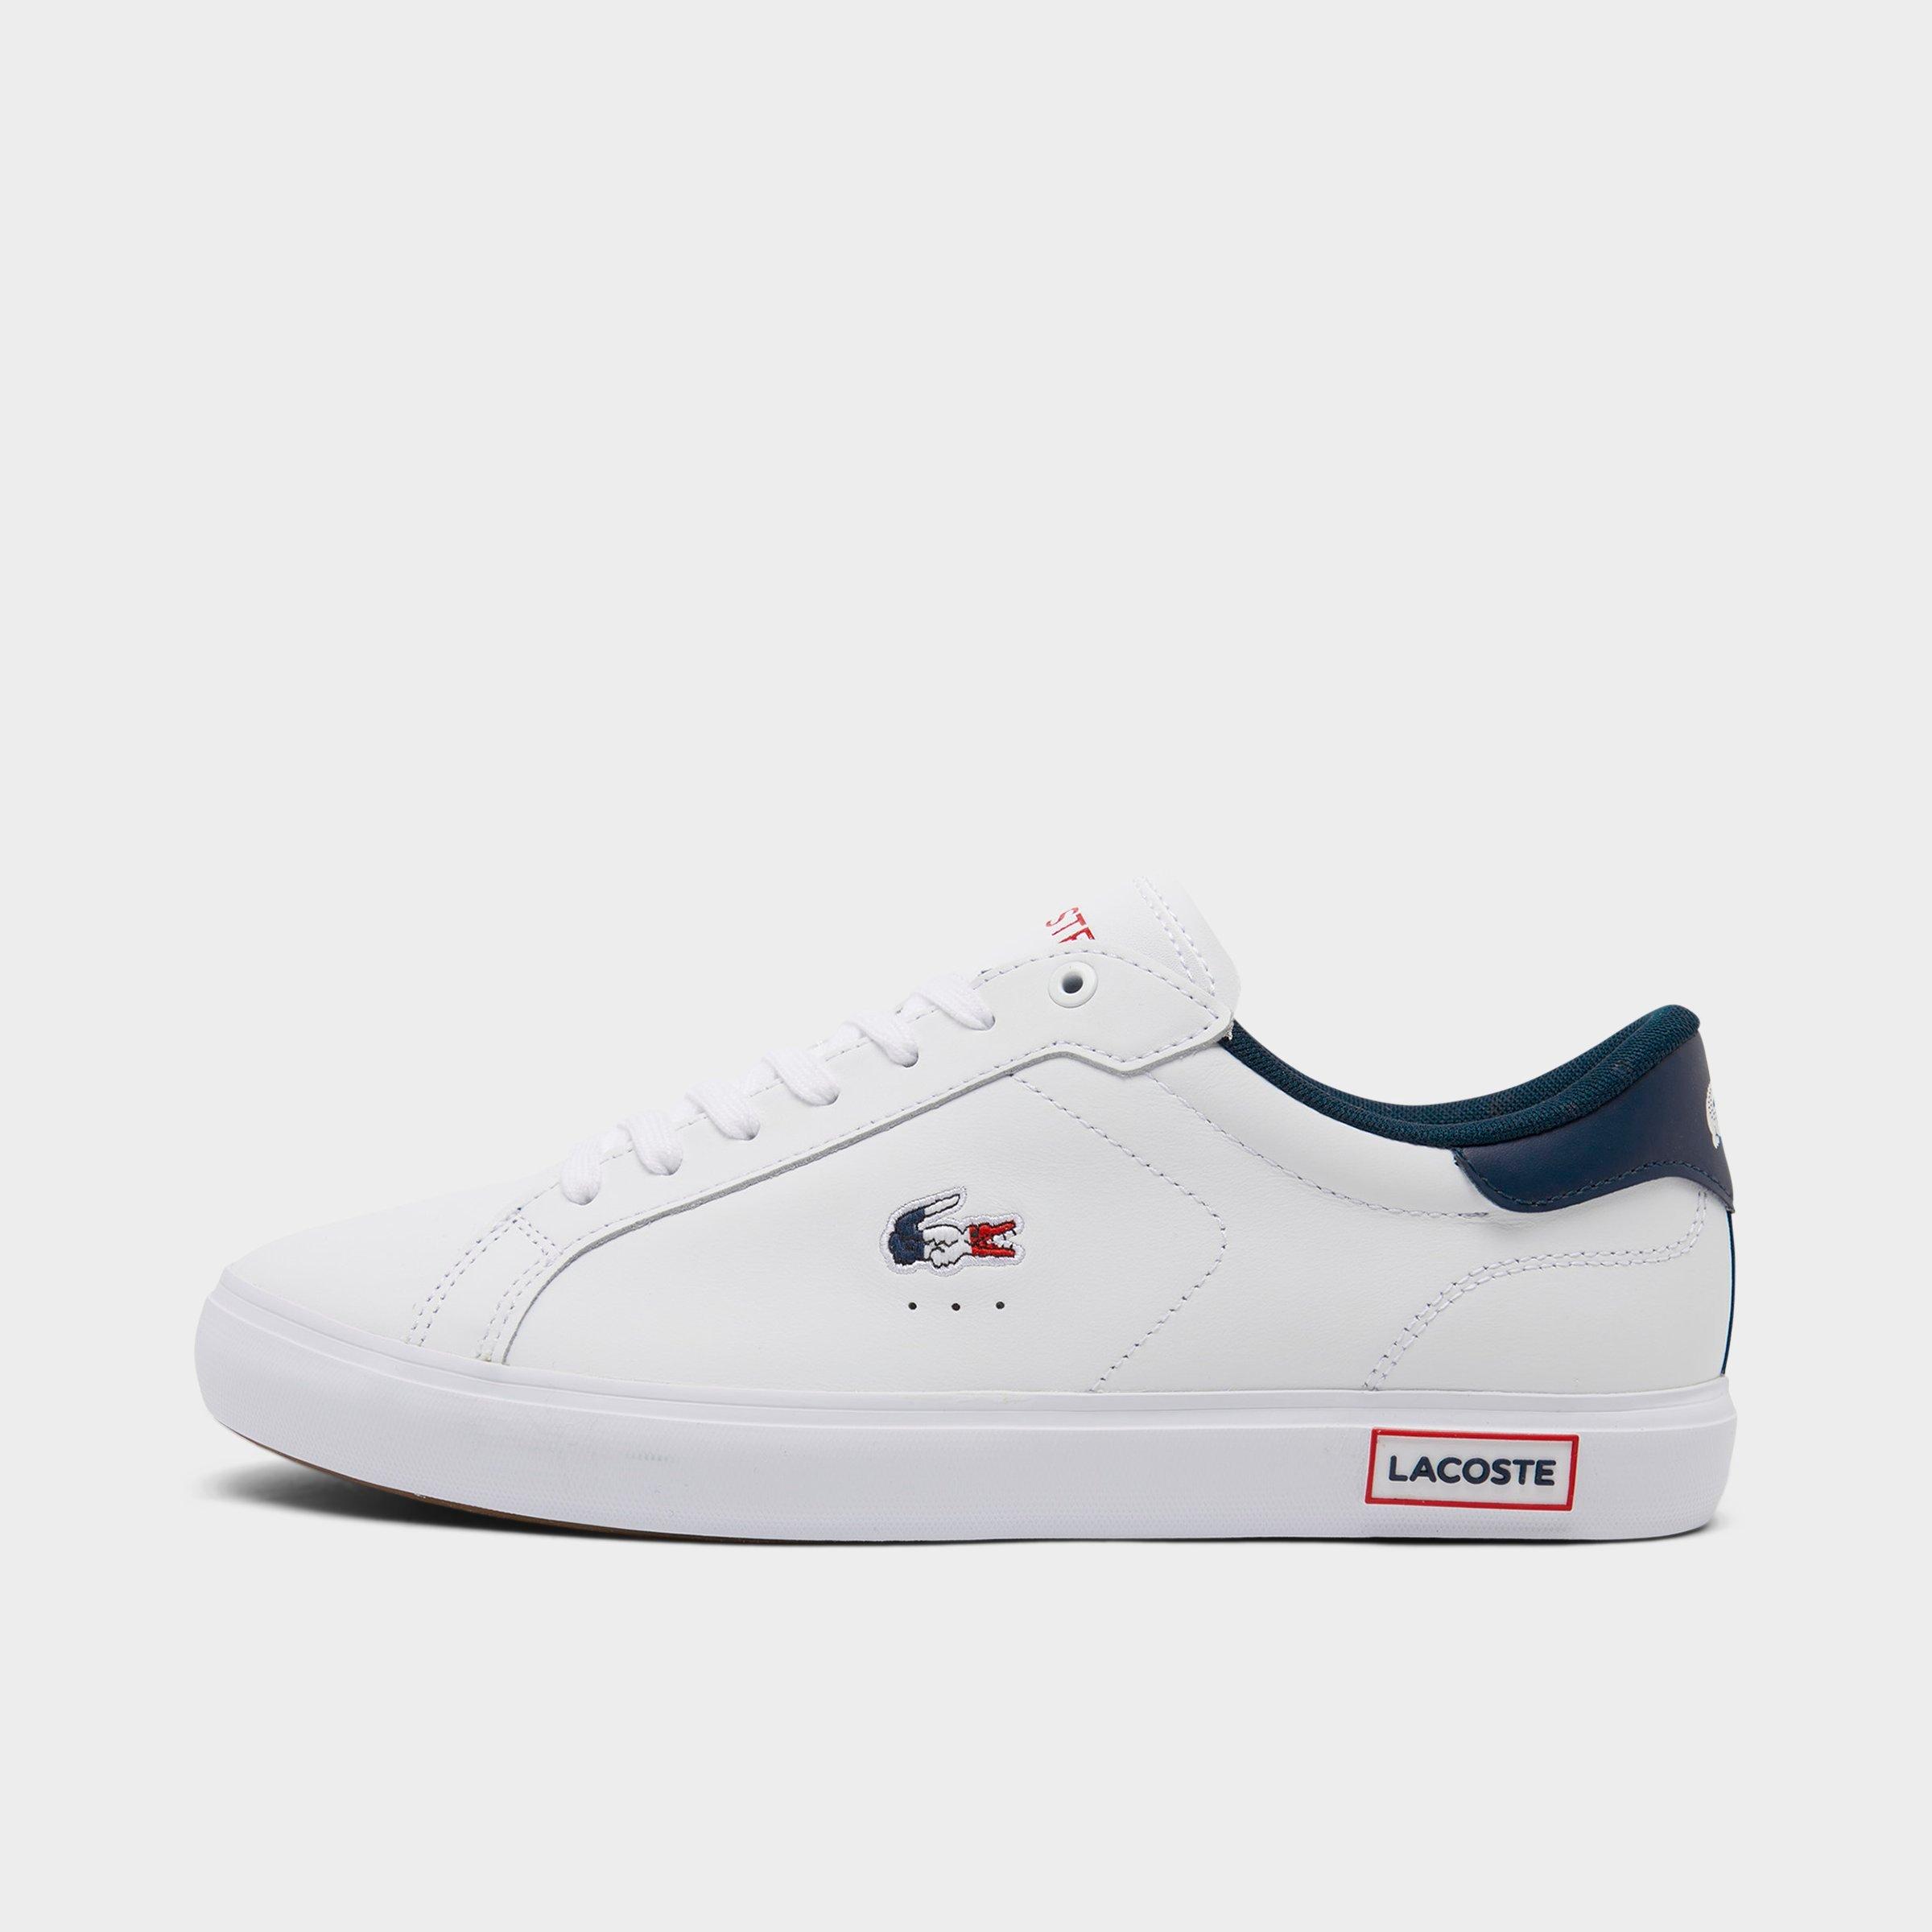 Lacoste Shoes, Apparel & Accessories for & Women | Finish